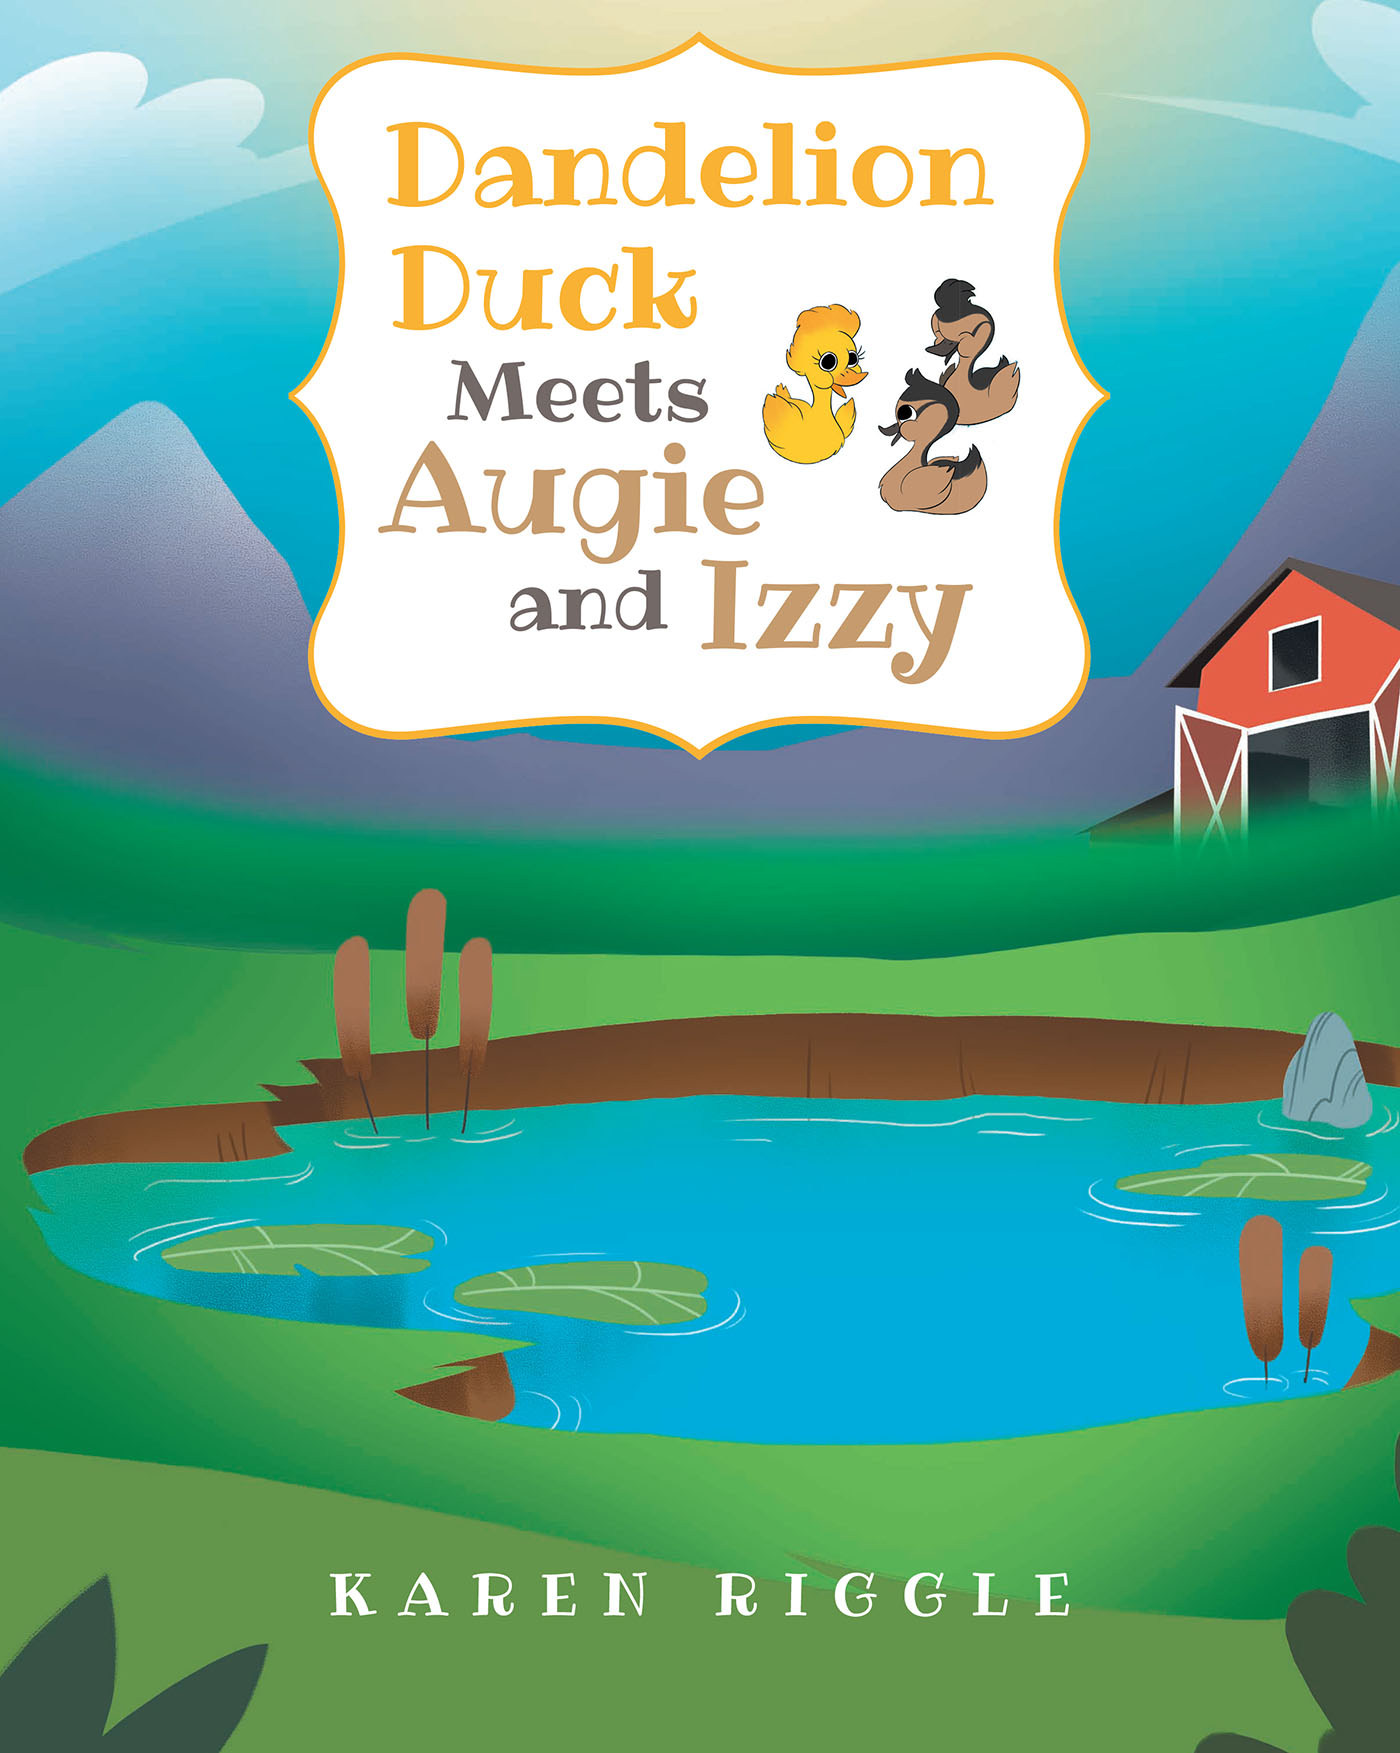 Karen Riggle’s Newly Released "Dandelion Duck Meets Augie and Izzy" is a Charming Addition to the Dandelion Duck Series That Finds New Friends on the Farm